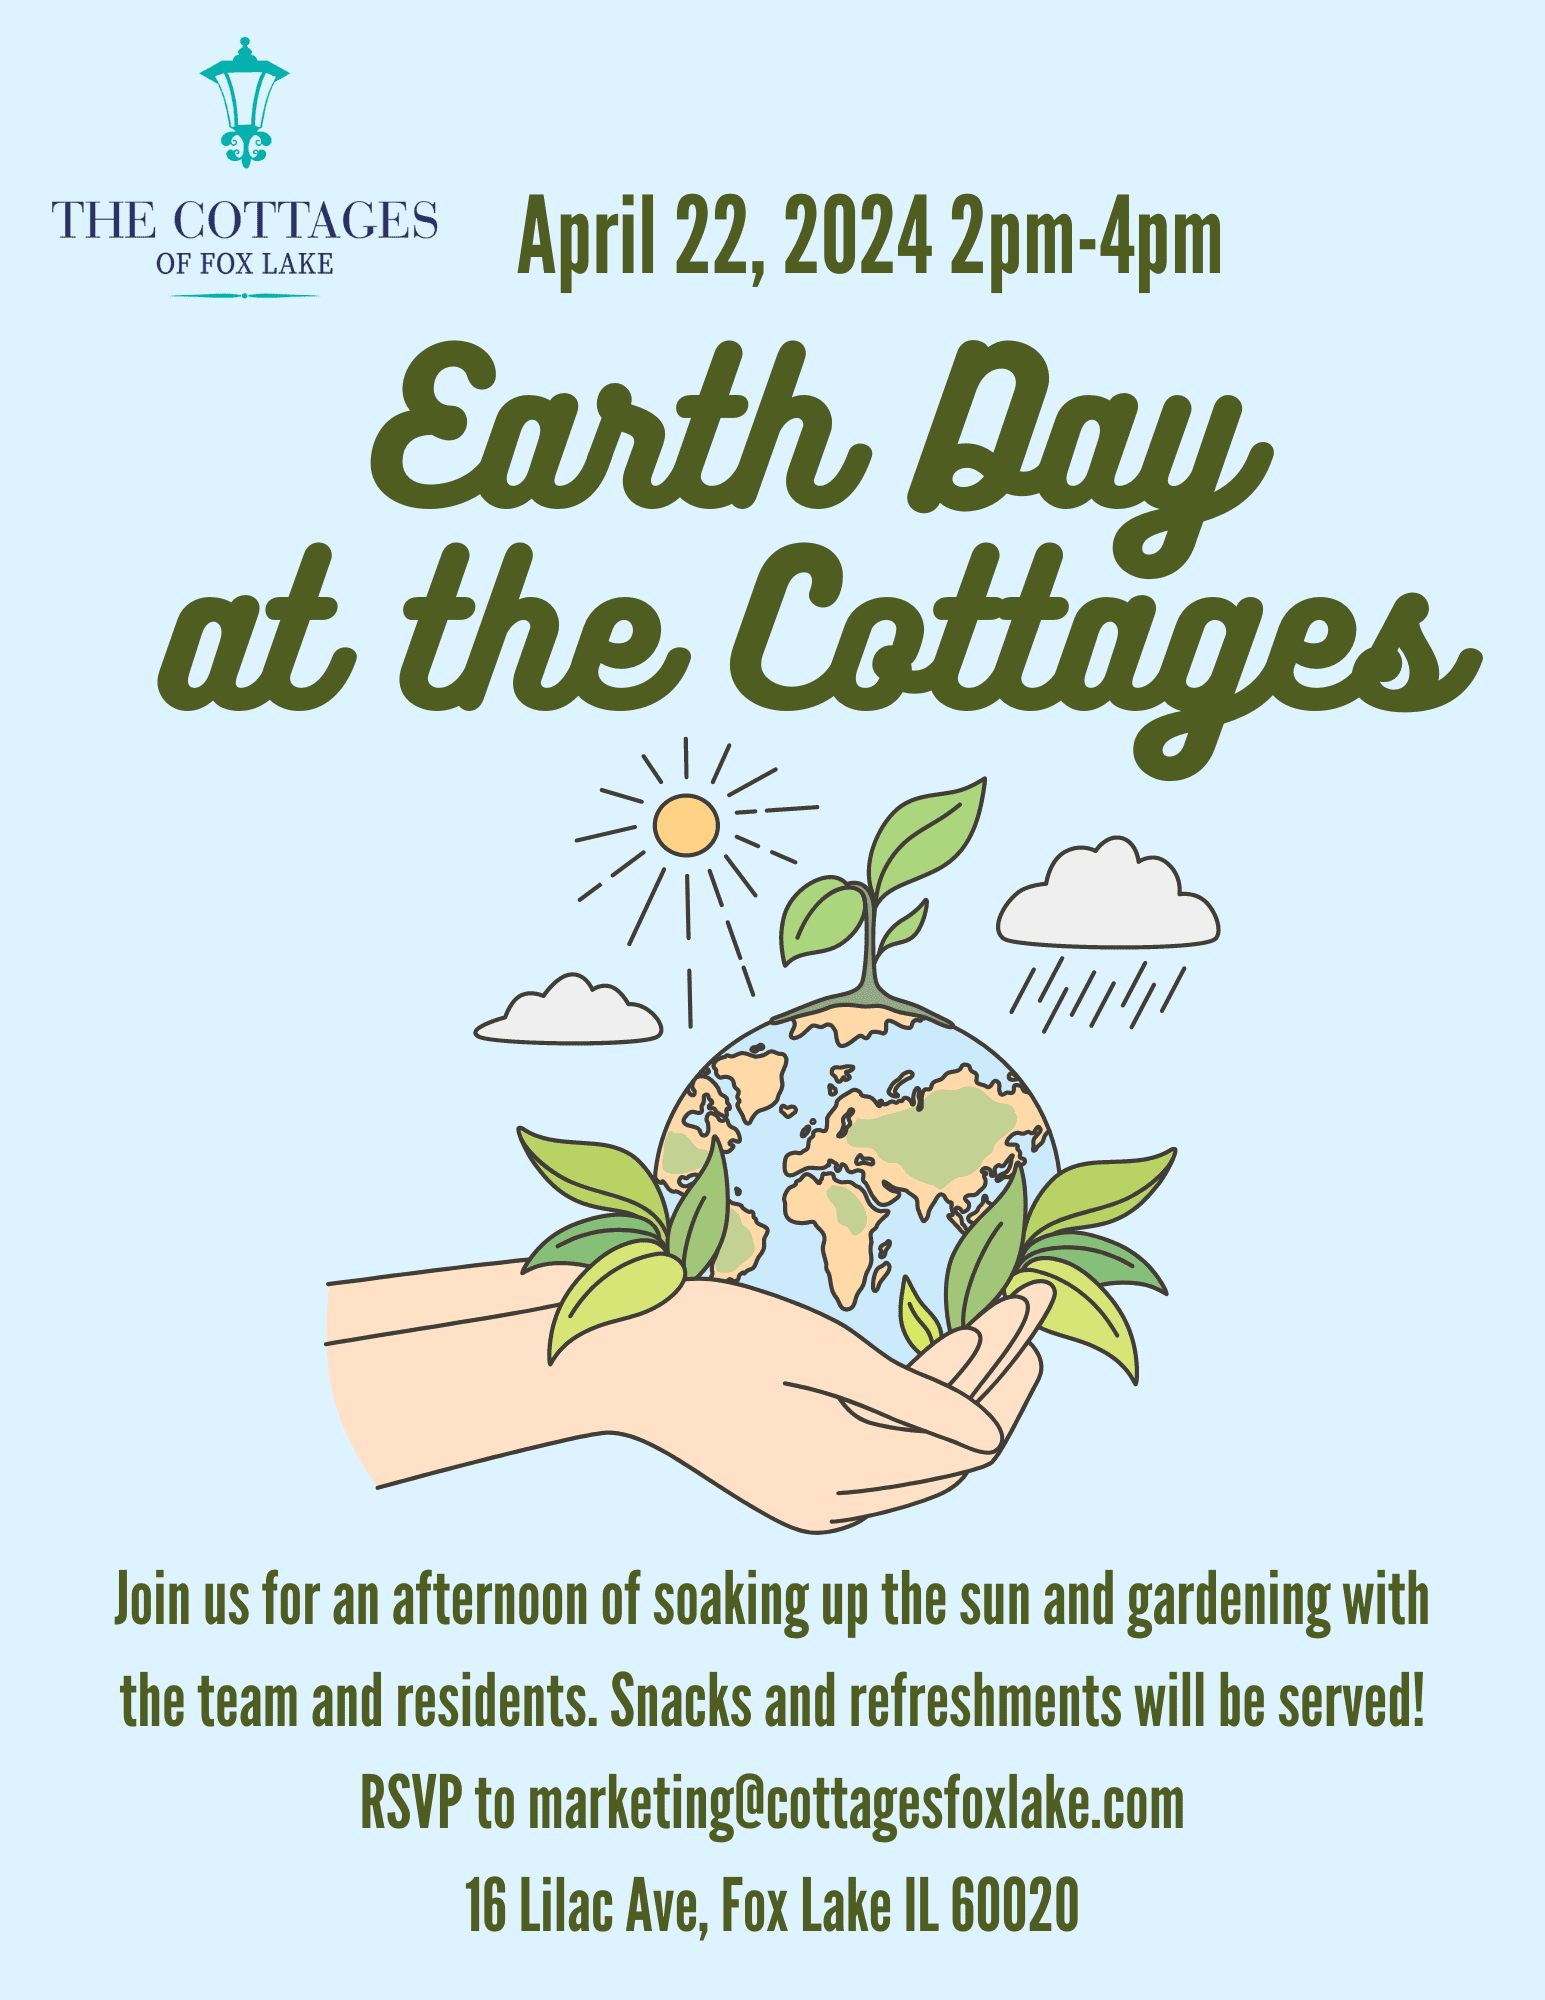 Cottages of Fox Lake - Assisted Living and Memory Care - Earth Day 2024